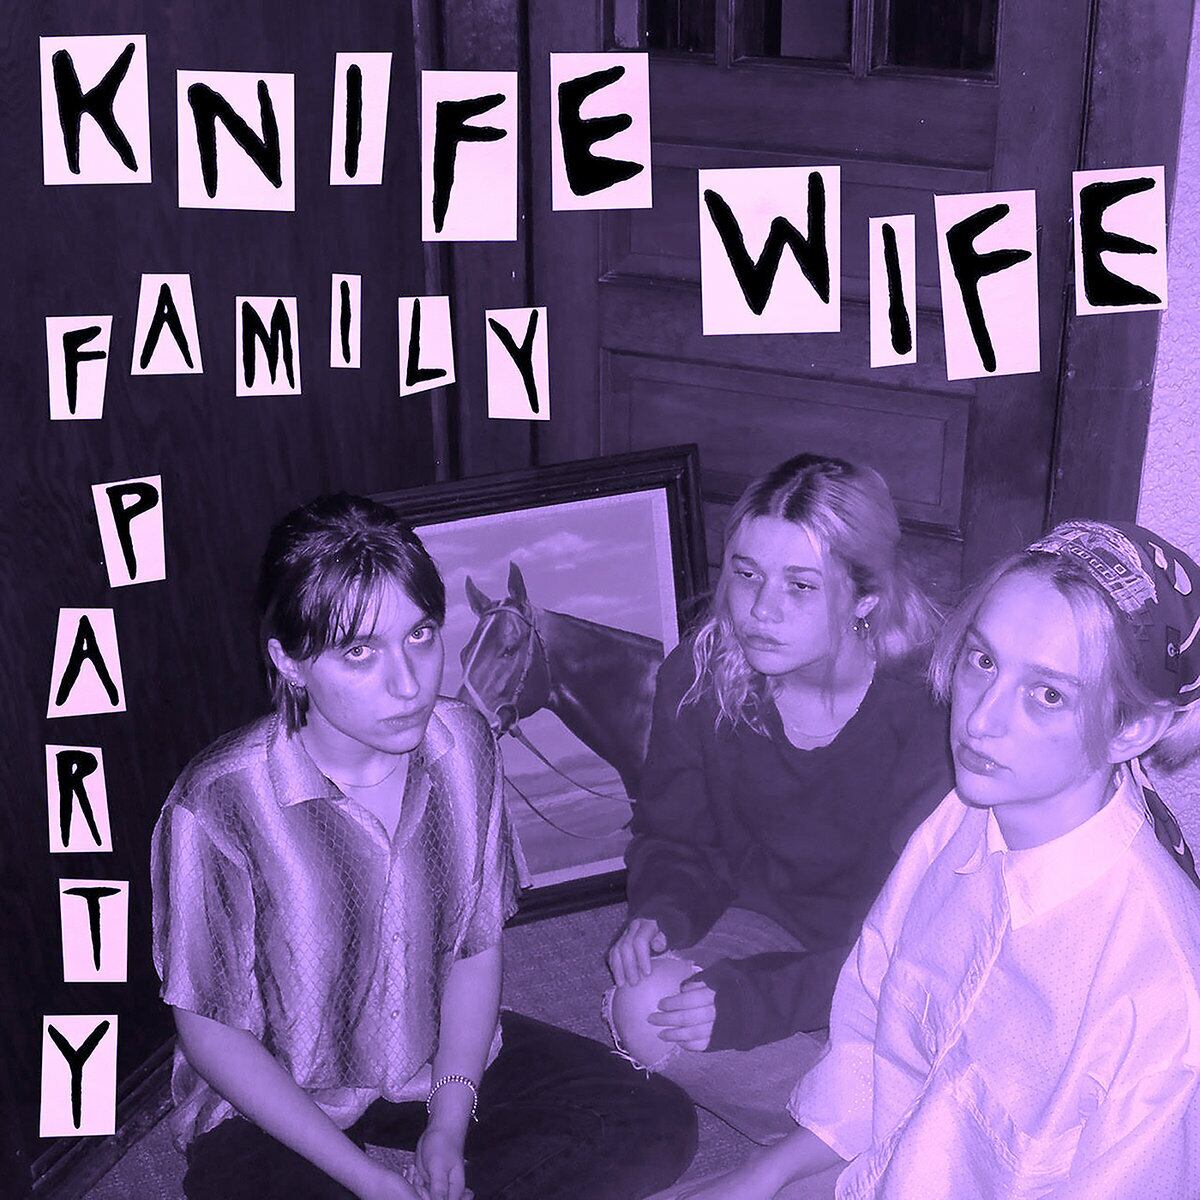 Knife Wife / Family Party（Cassette）